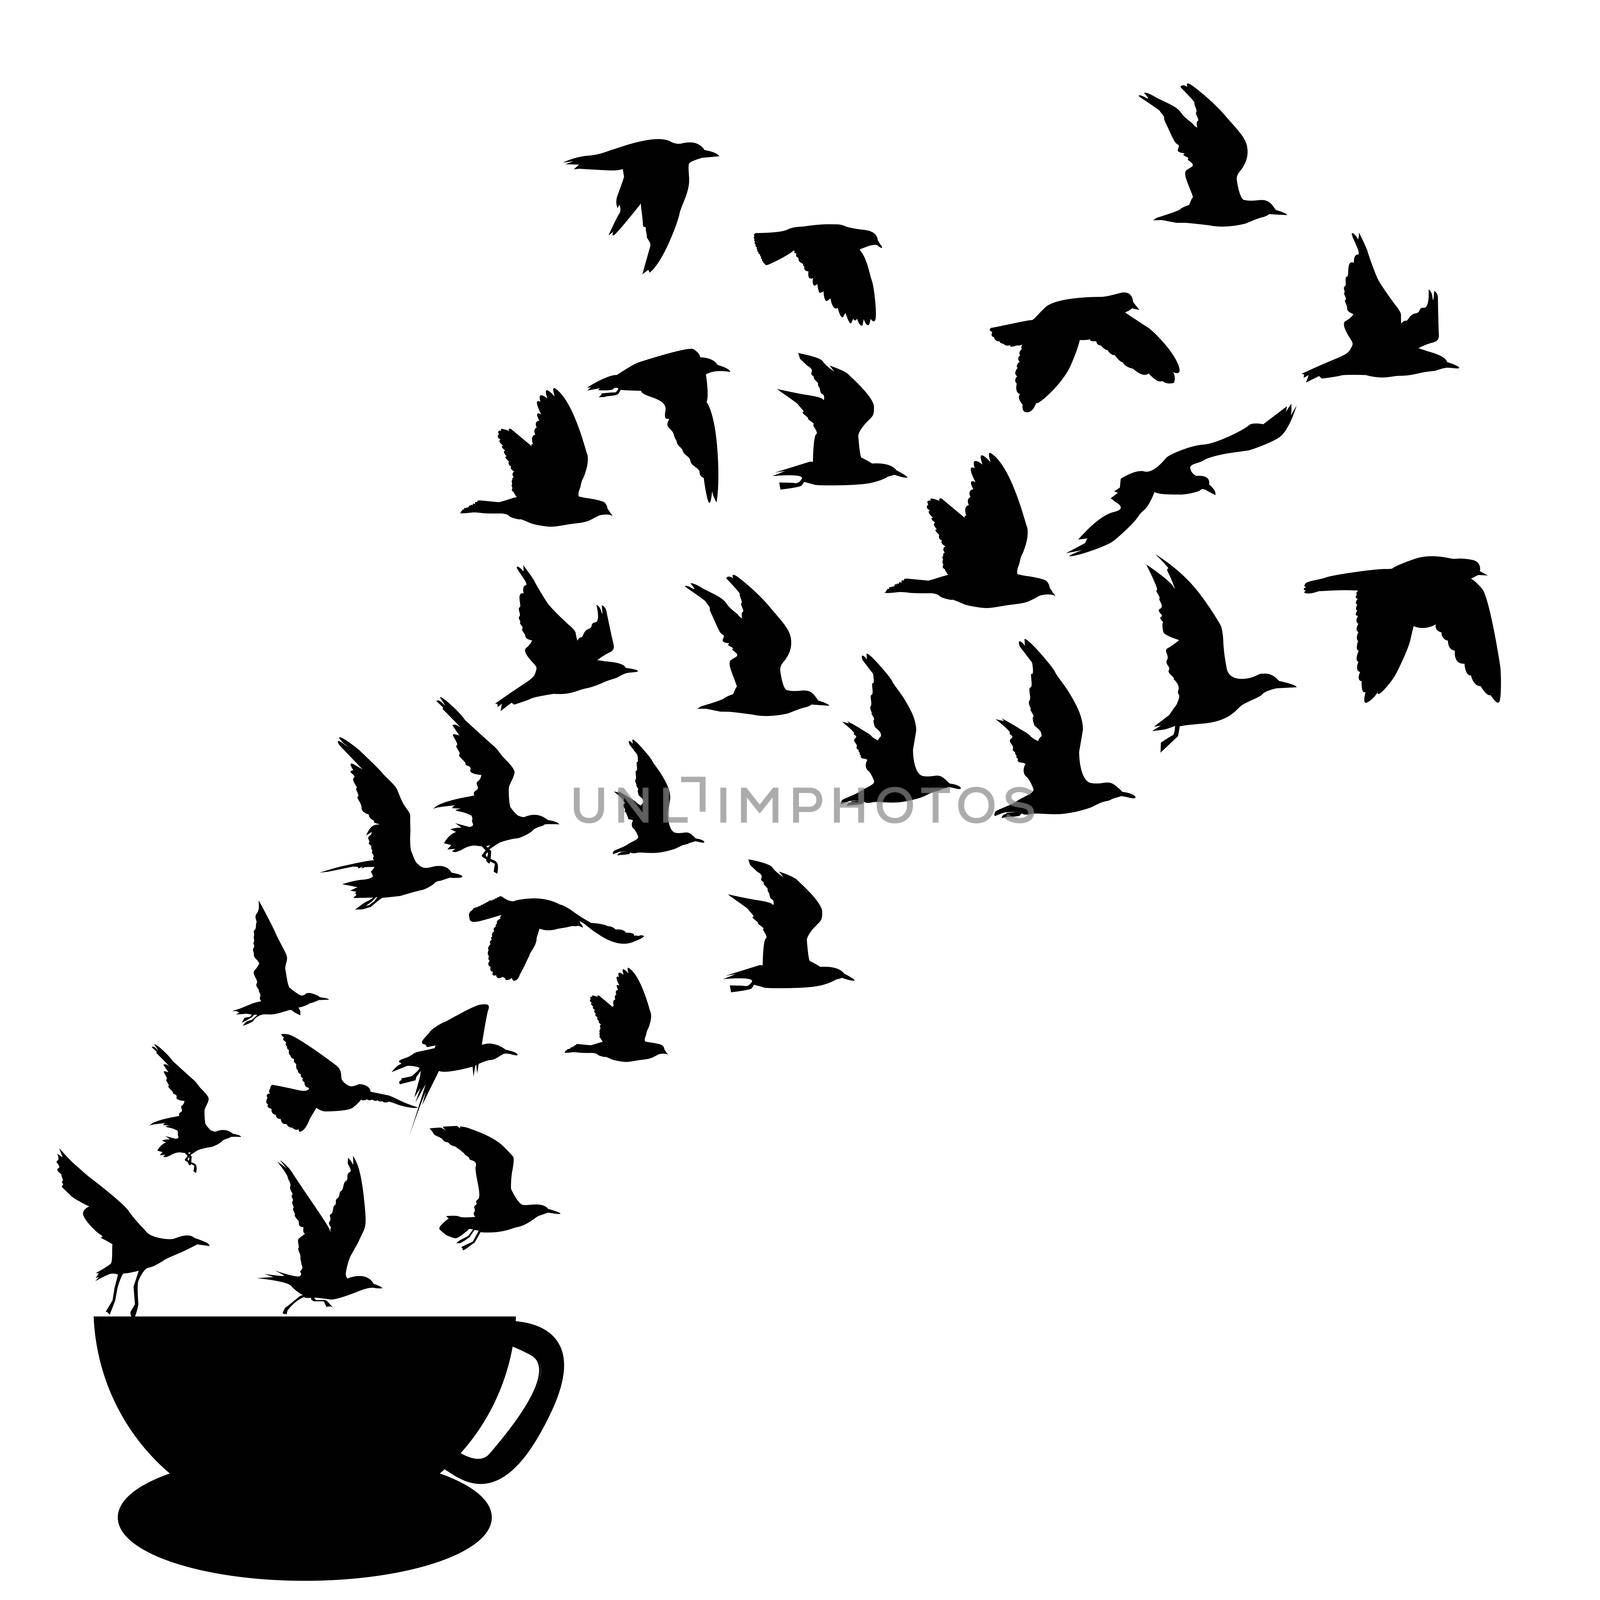 Silhouettes of birds flying from a cup of coffee by hibrida13